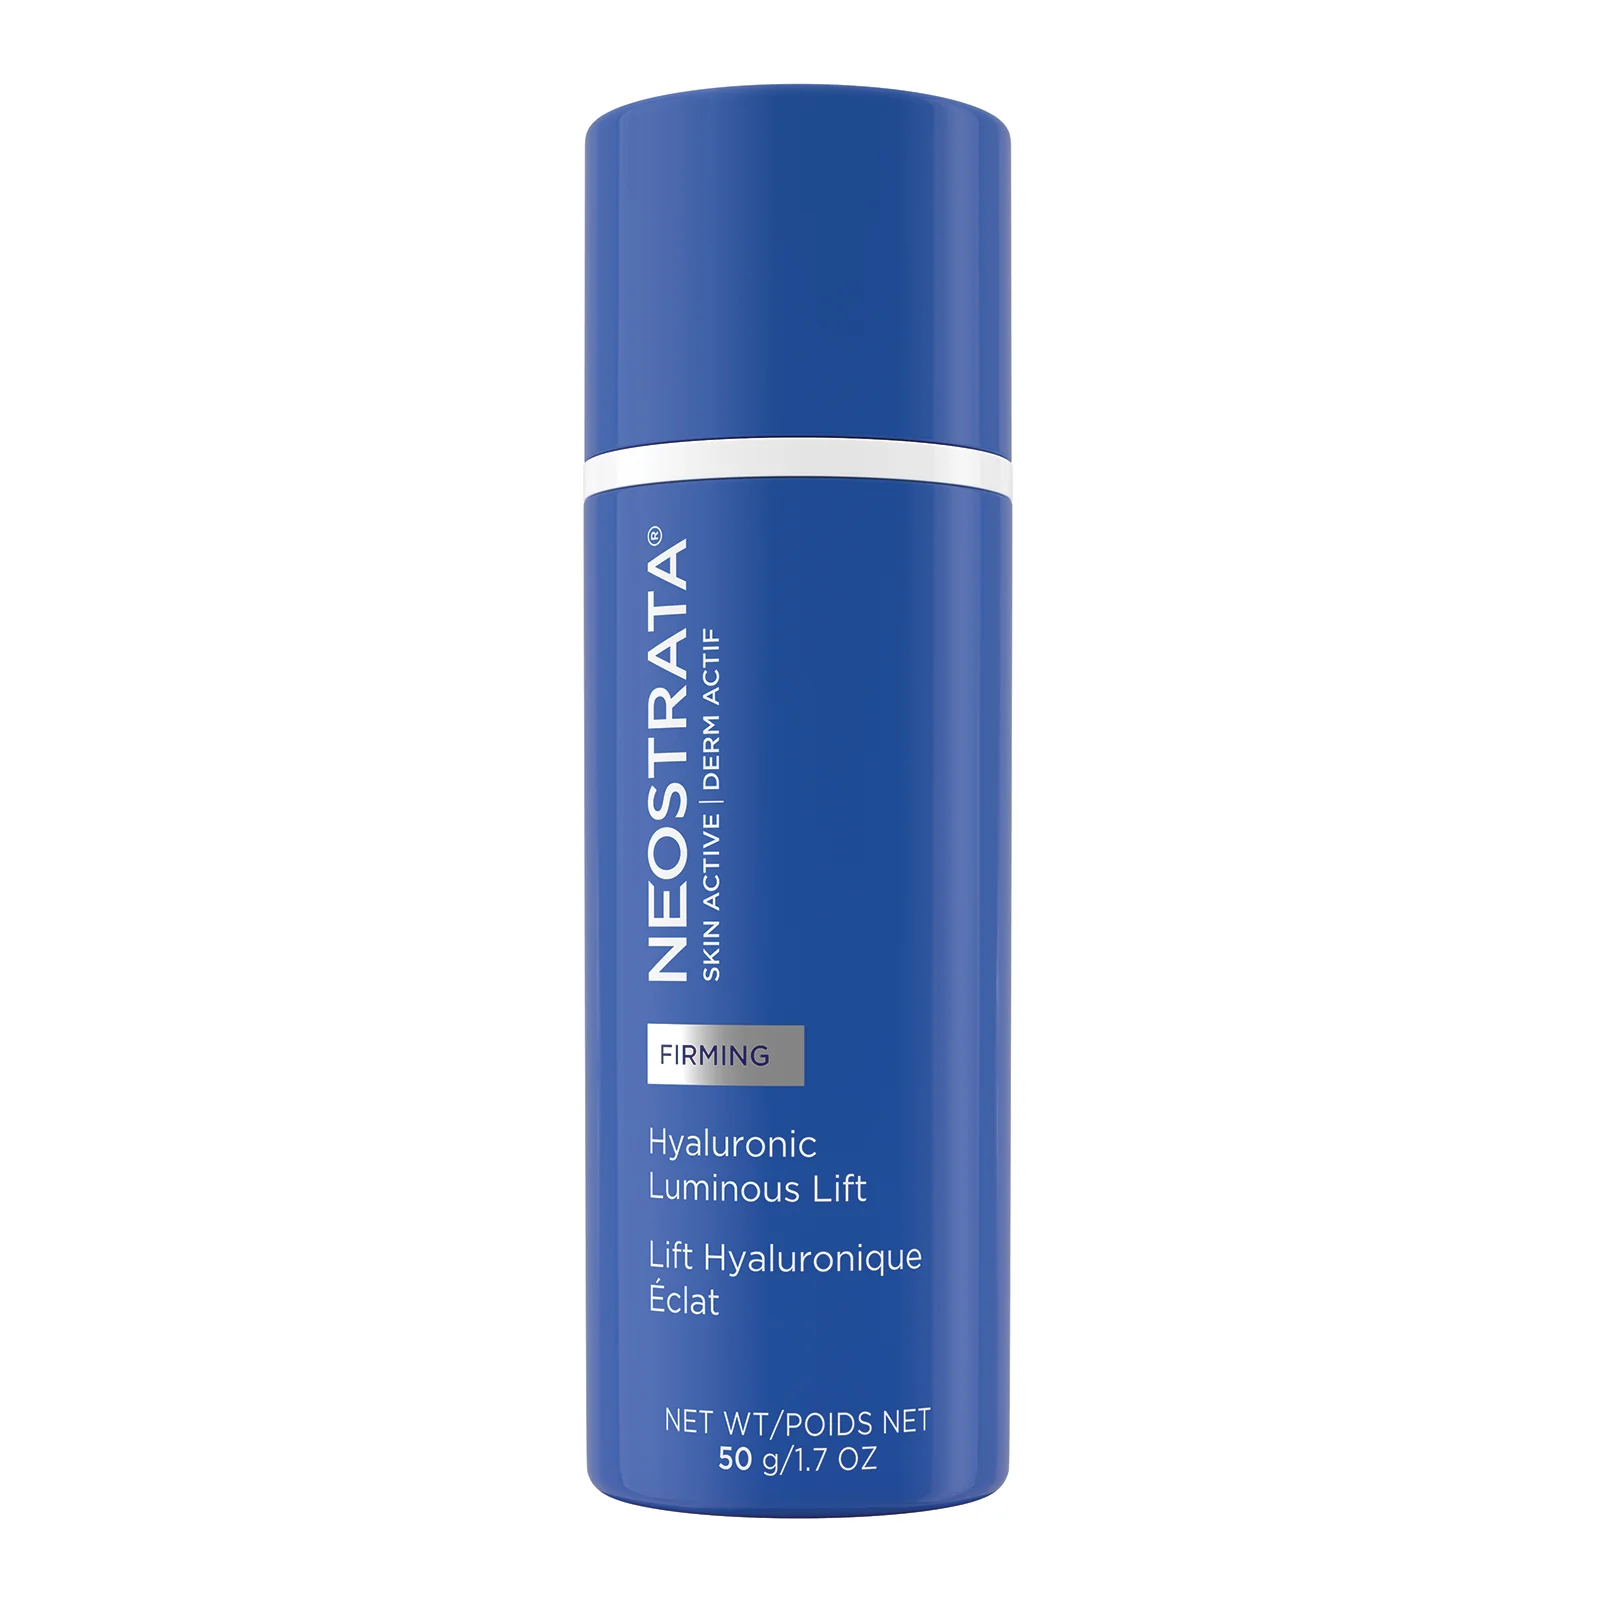 NeoStrata Skin Active Firming Hyaluronic Luminous Lift